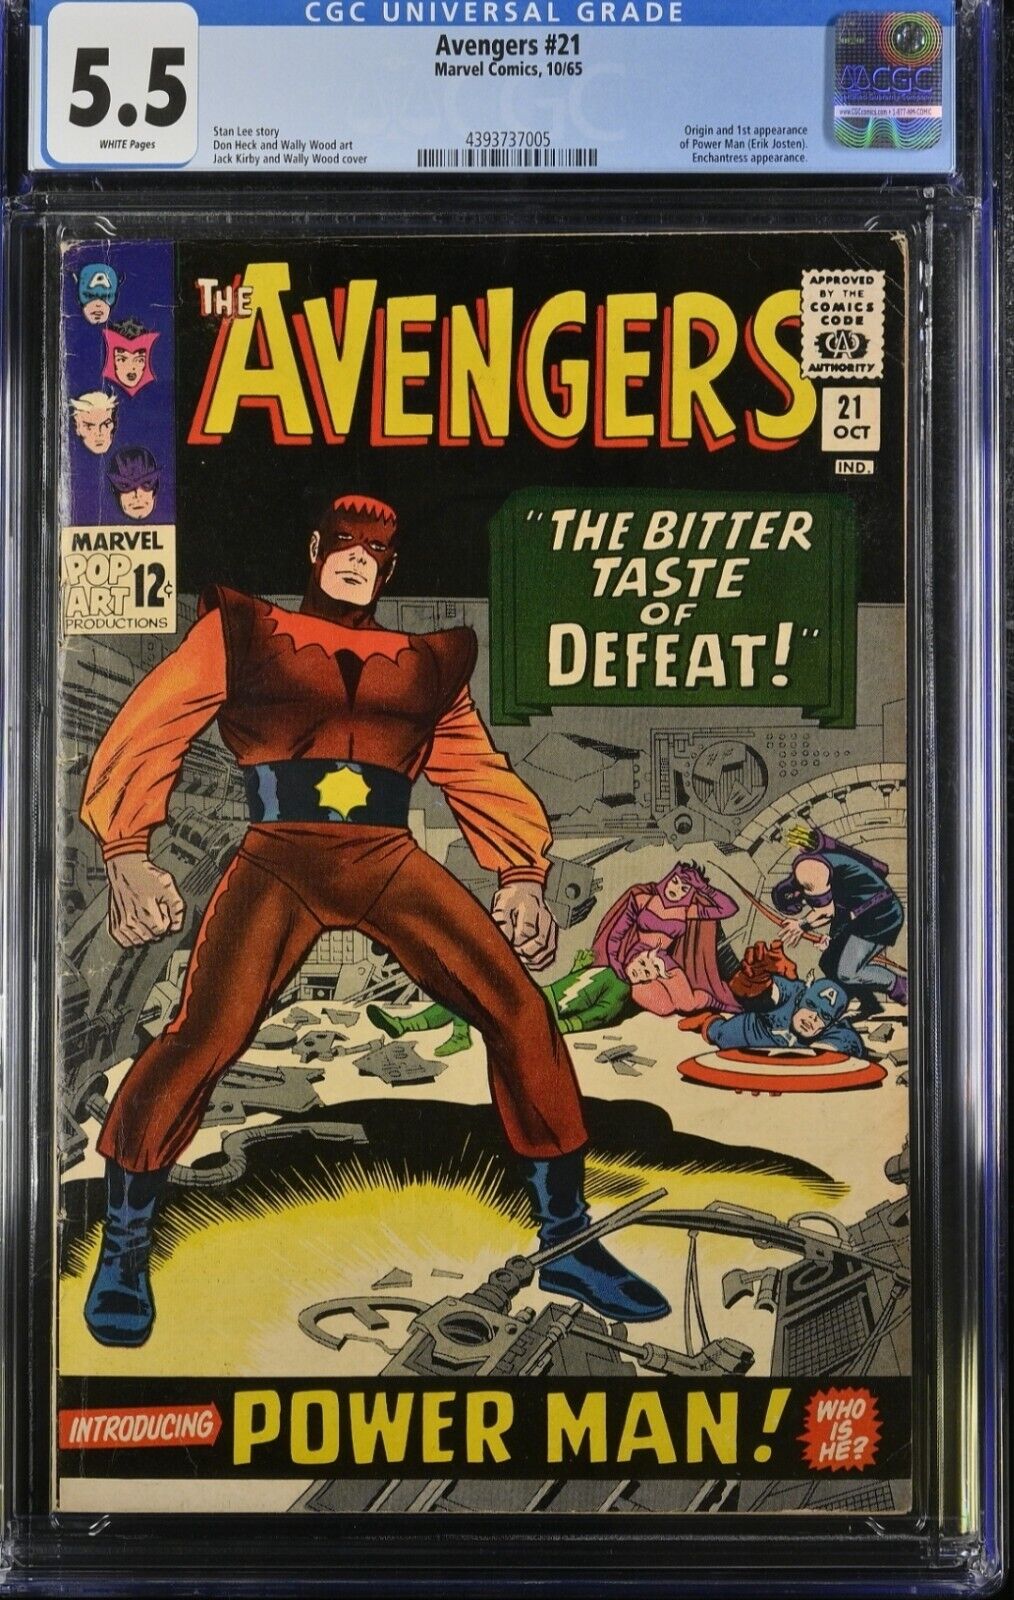  AVENGERS #21 CGC 5.5 WHITE PAGES 1ST APPEARANCE ORIGINAL POWER MAN KIRBY/WOOD